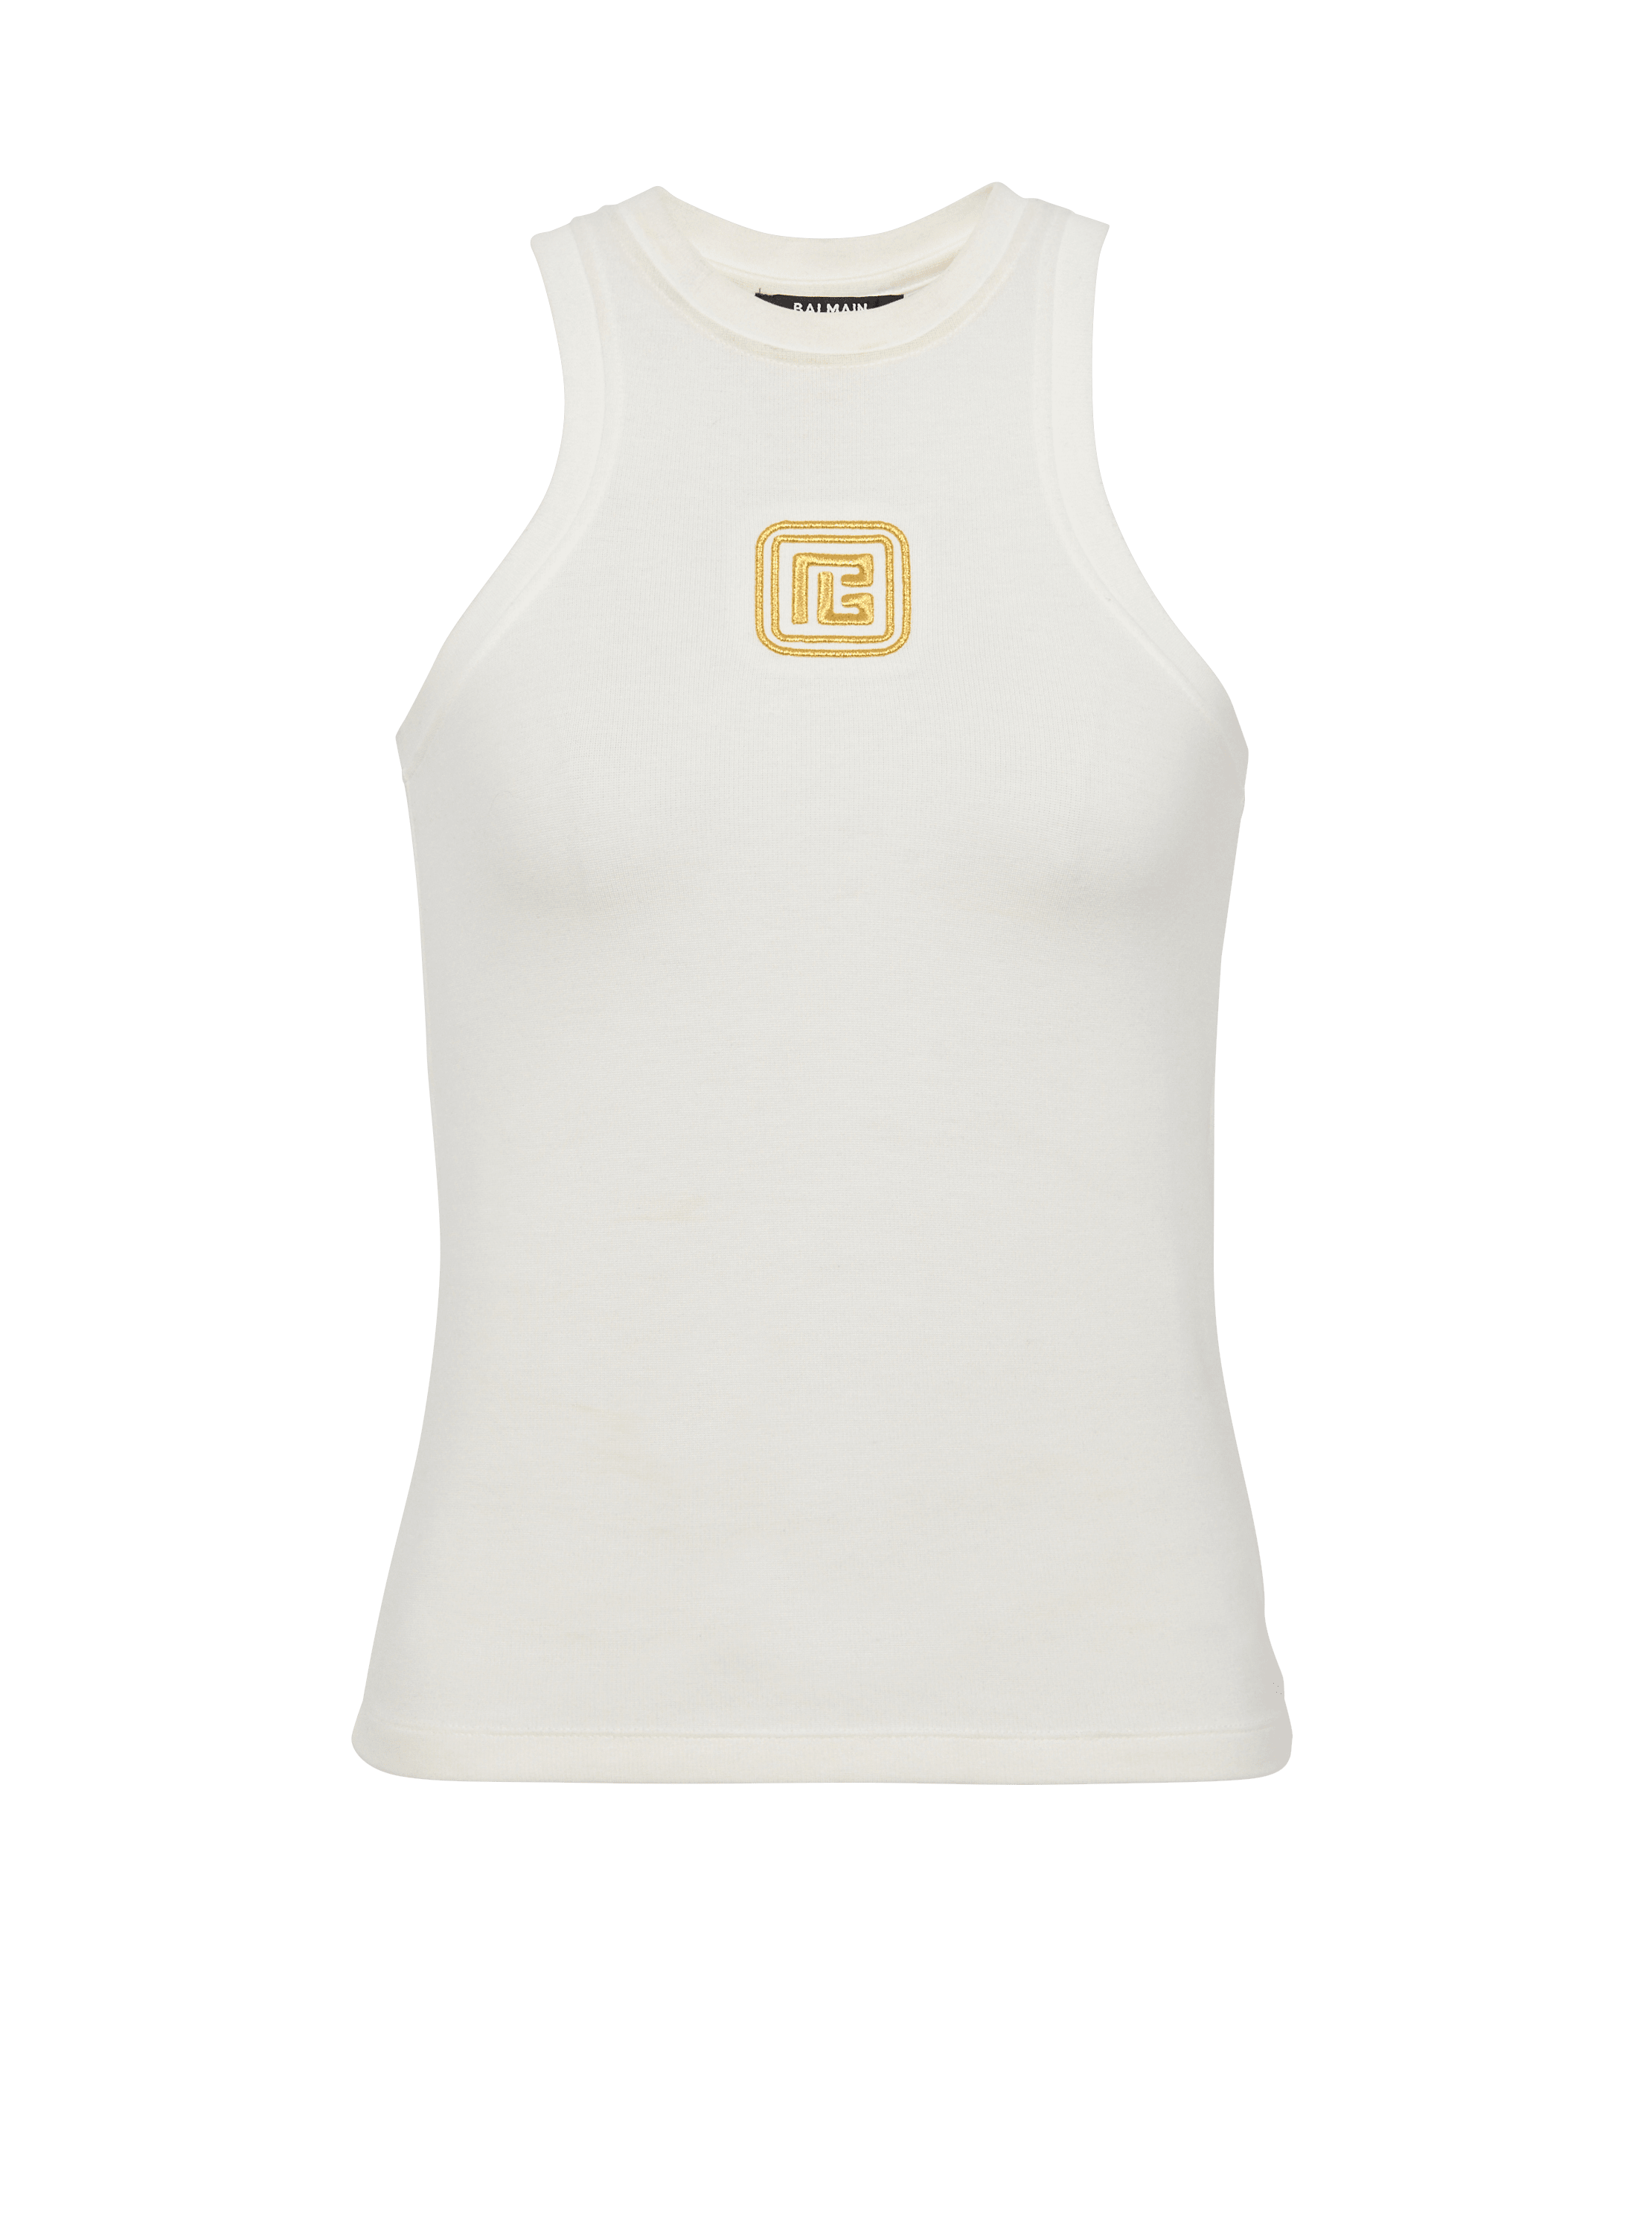 PB embroidered tank top